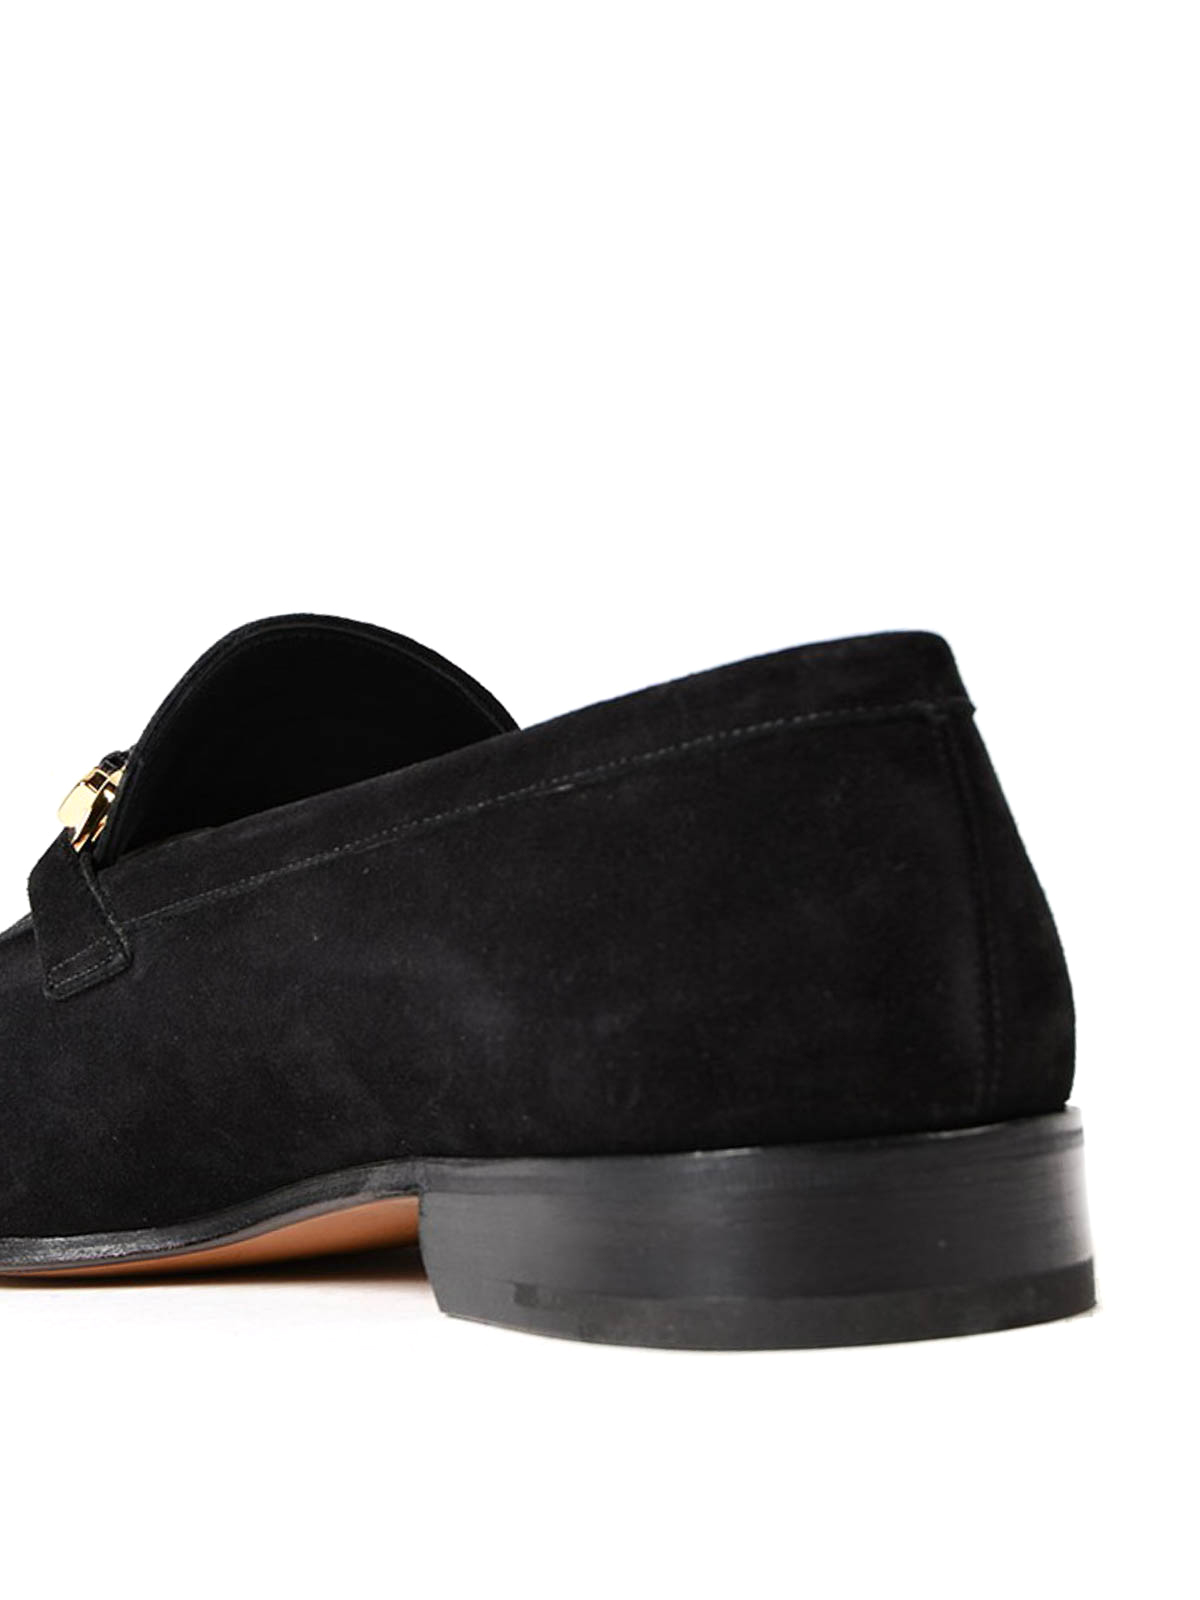 suede woven loafers